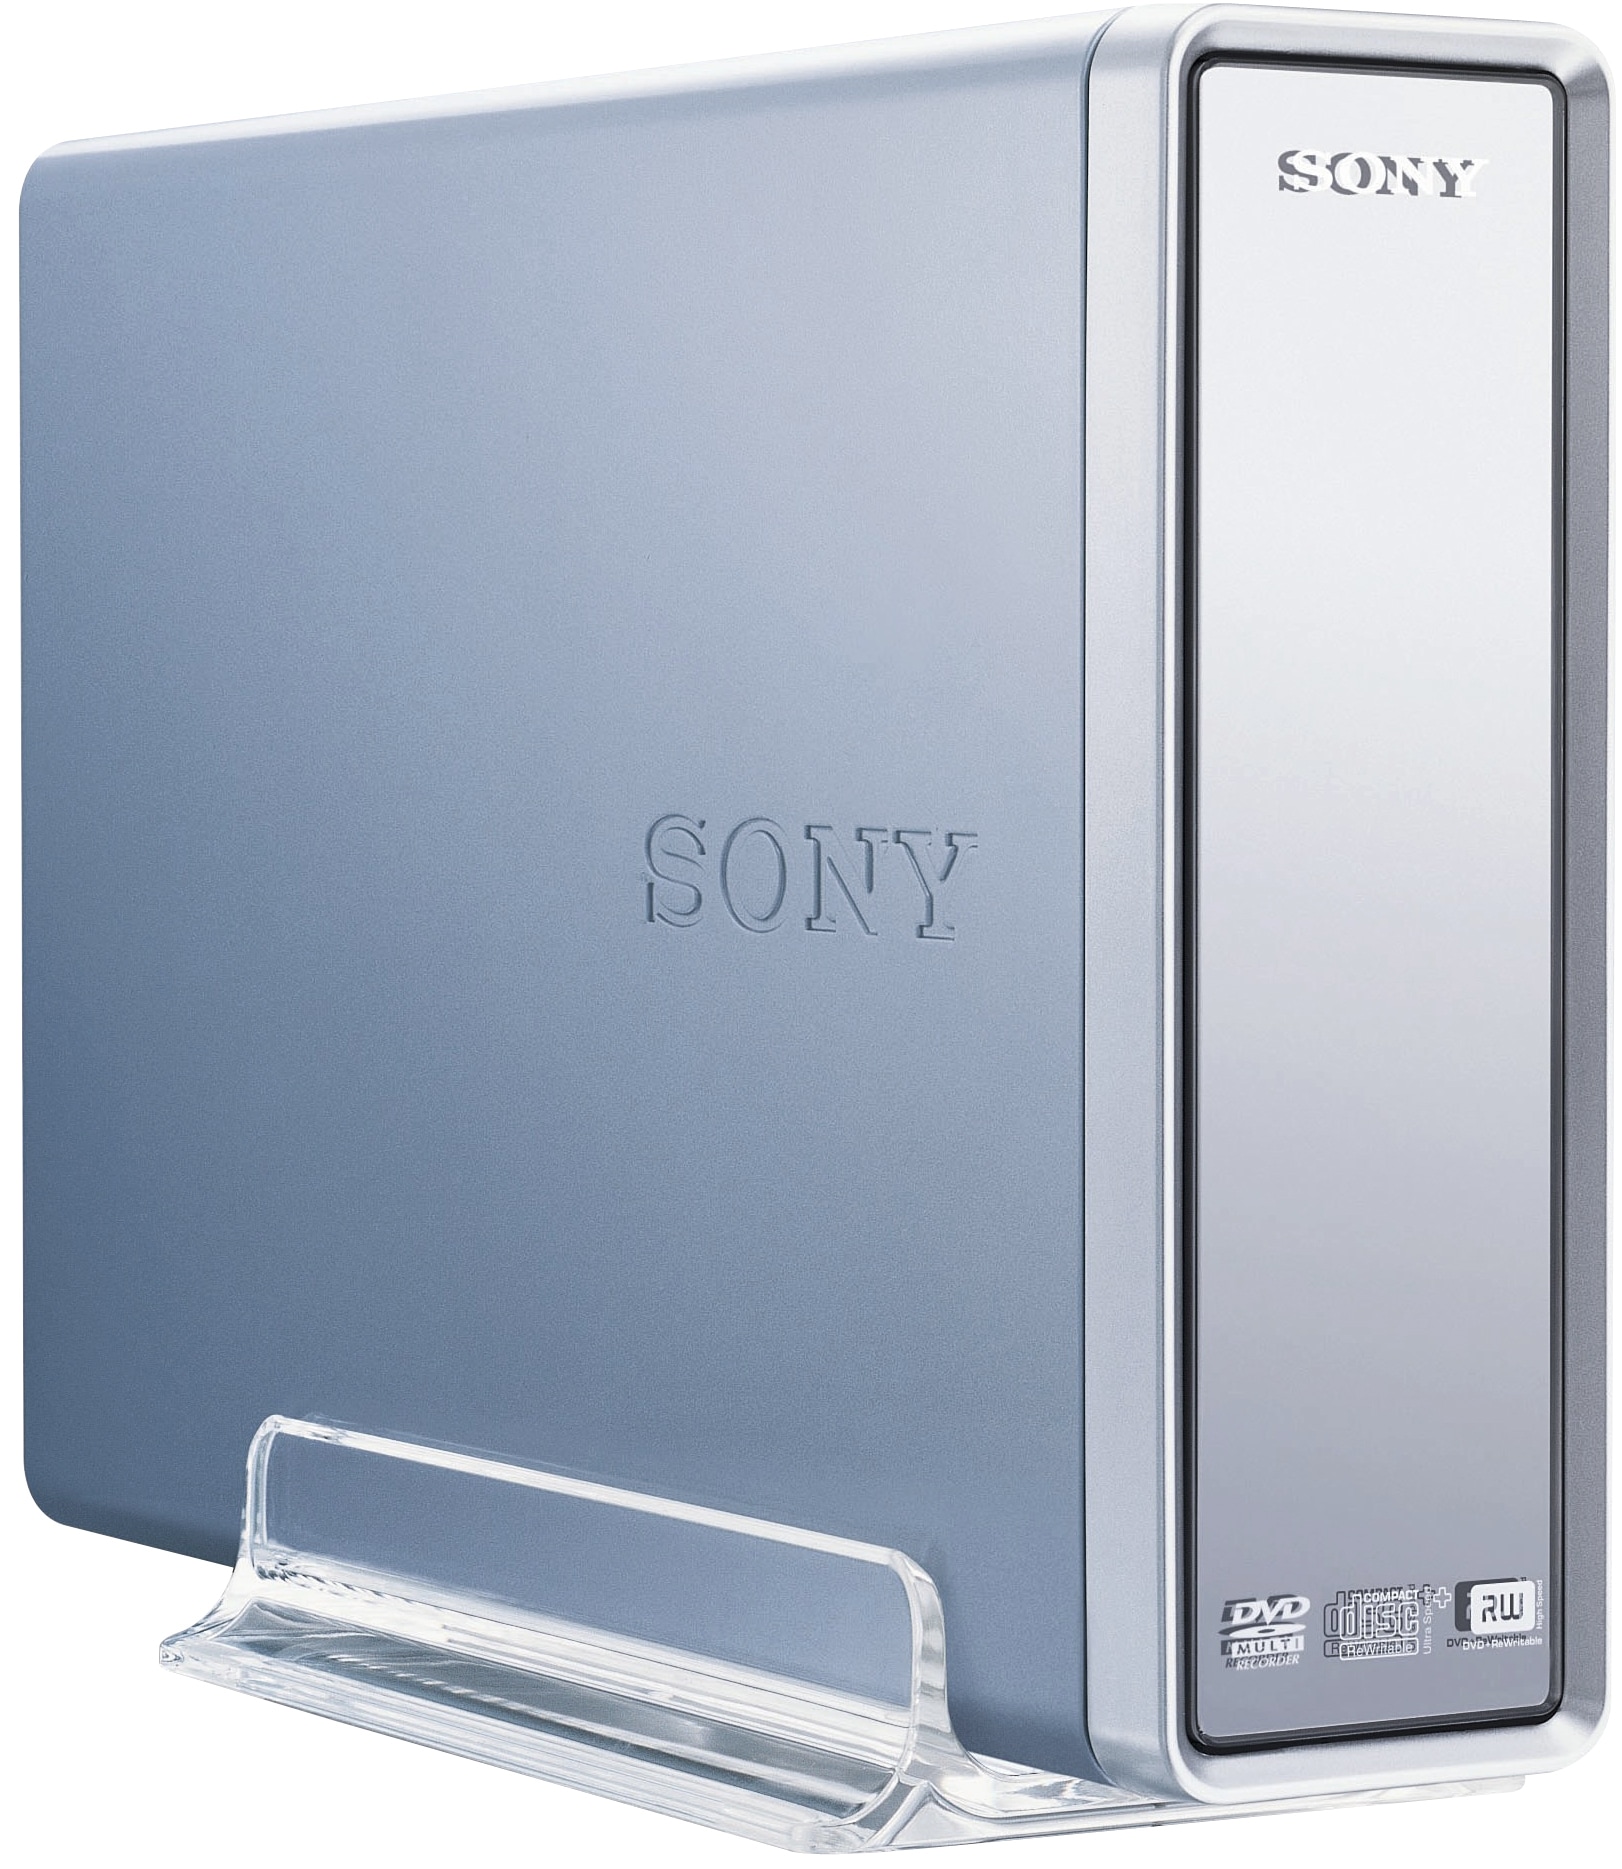 Sony External 18x max DVD Multi-Format Burner for for Macintosh® and Micros